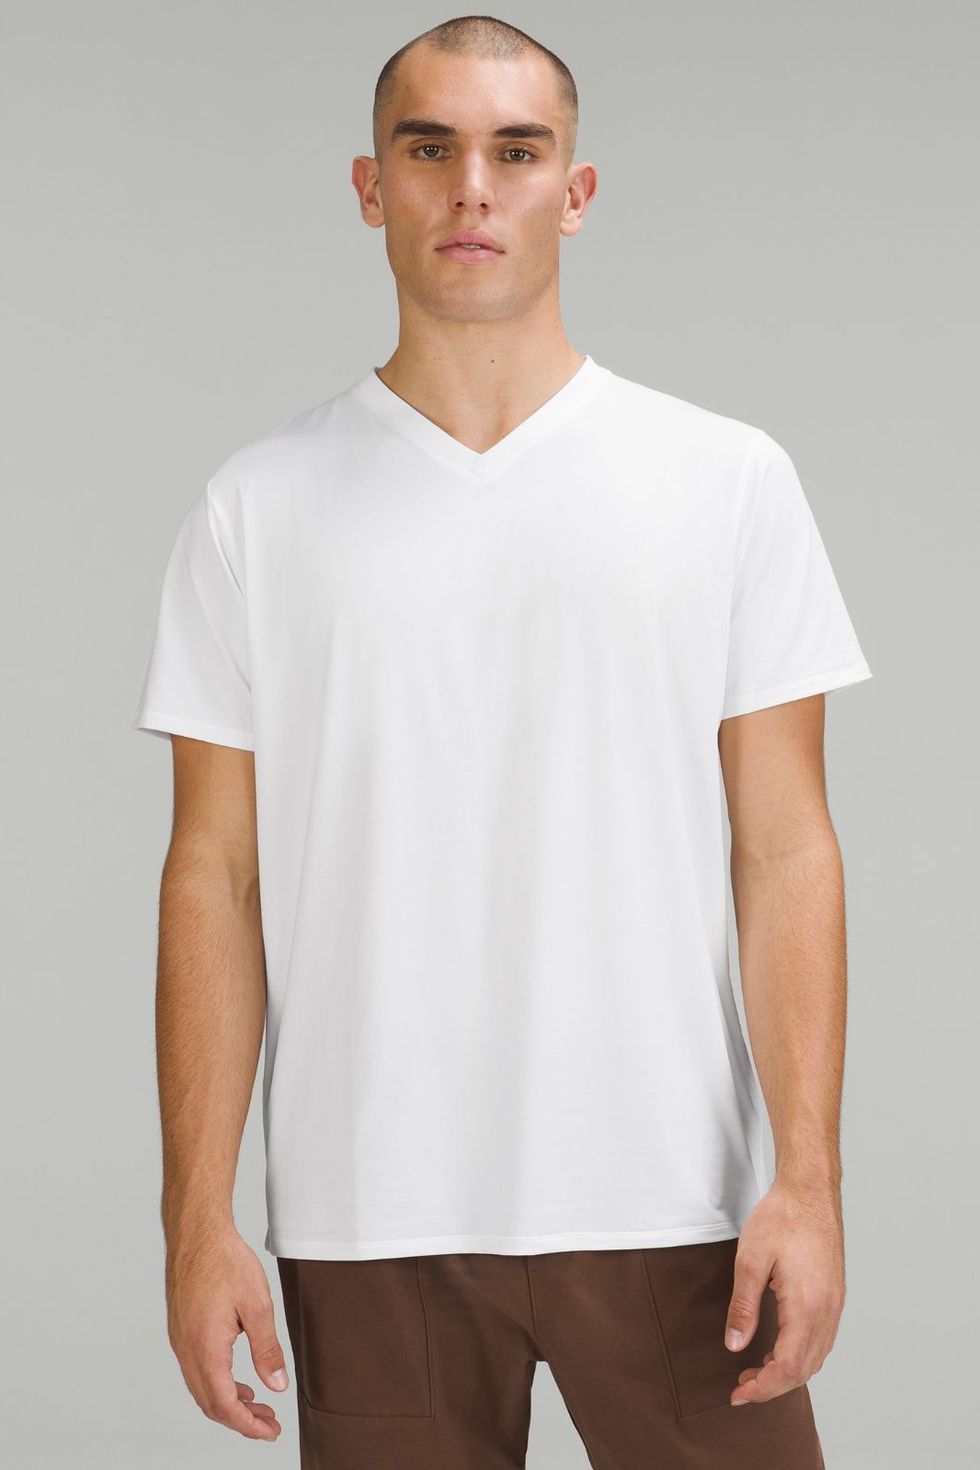 Best White T-shirts For Men: 20 Perfect White Tees To Shop 2023